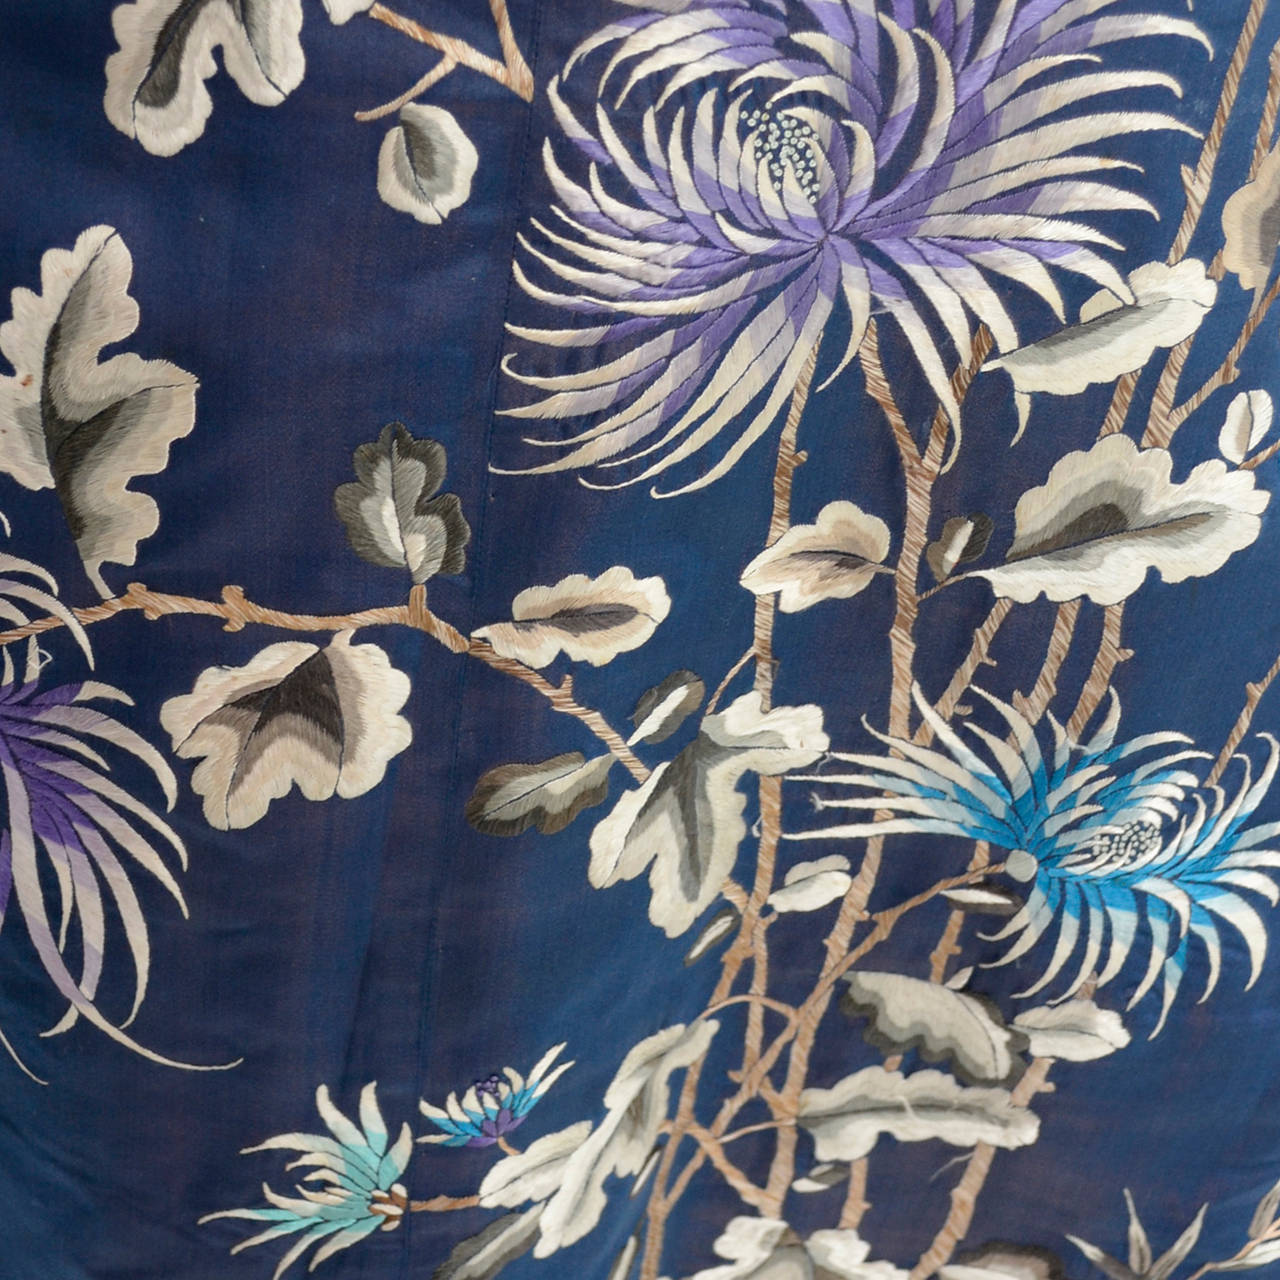 This extraordinary embroidered silk Chinese cheongsam came from an estate I recently acquired of fine Asian silk clothing. The woman collected pieces from the late 1800s through the mid part of the 20th century. This is from the late 1910's and the